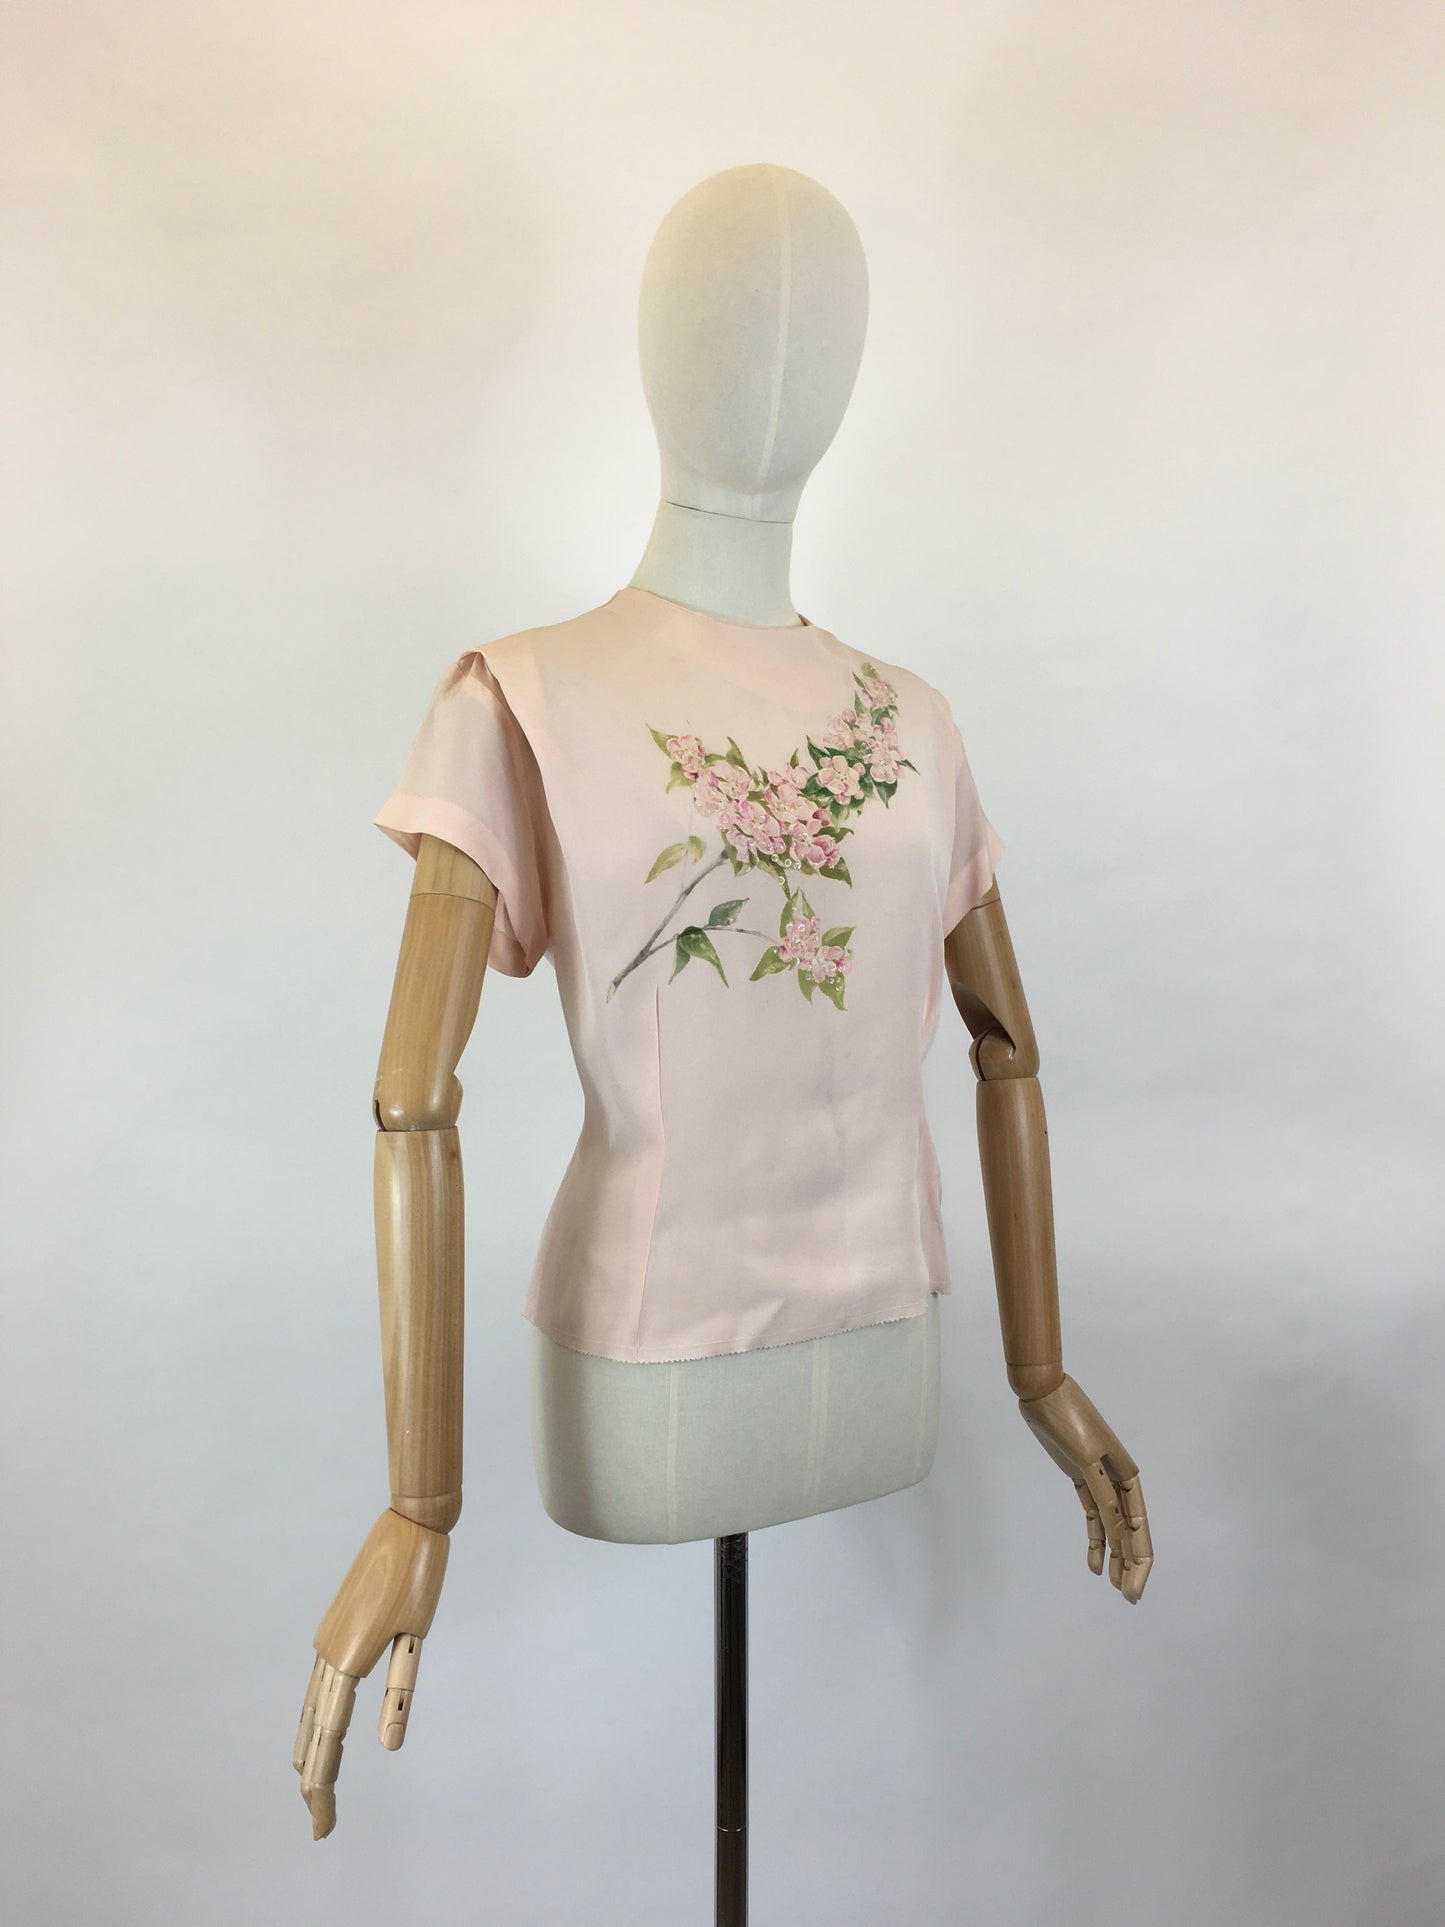 Original 1940’s Darling Rayon Blouse in Soft Peach - With Painted Floral & Beadwork Embellishments